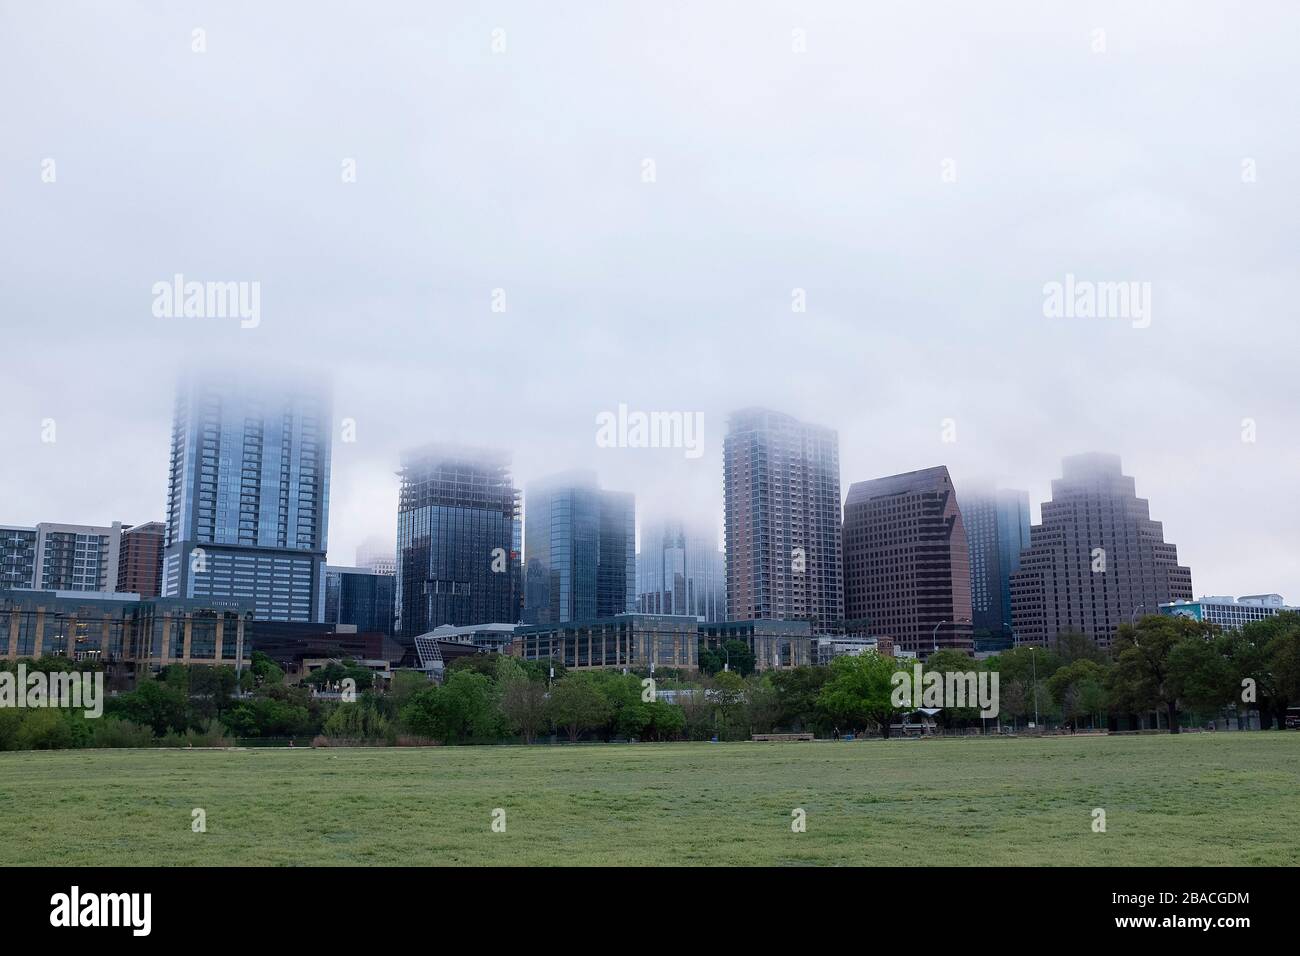 March 26, 2020: The world wide Pandemic Covid-19 impacts daily exercise activities at the Hike and Bike trail on Lady Bird Lake where hundreds of runners, walkers, and bikes would be exercising every morning. Austin, Texas. Mario Cantu/CSM Stock Photo